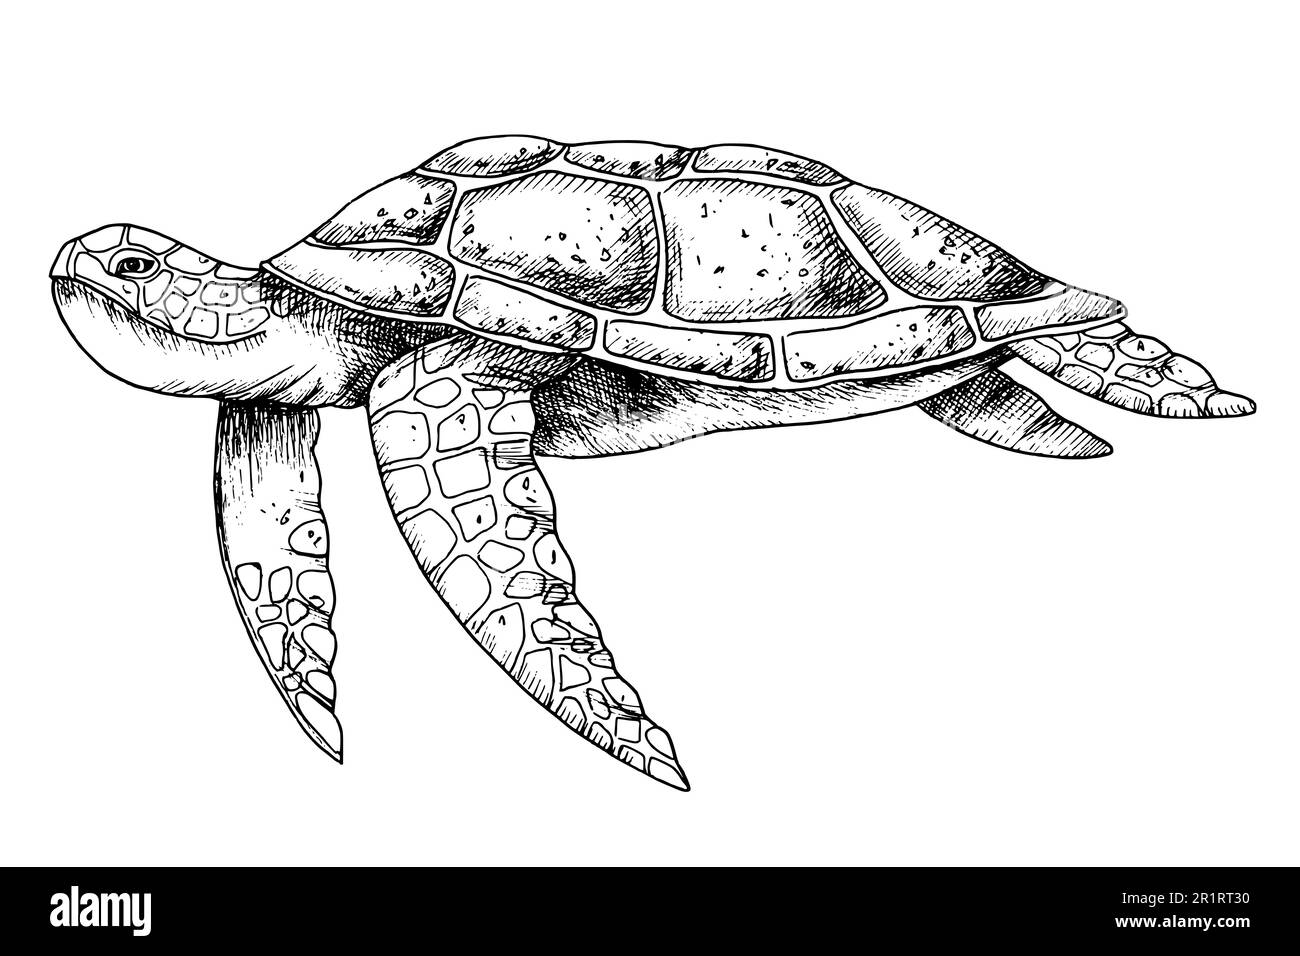 Sea Turtle. Hand drawn vector illustration of undersea Tortoise on isolated background in outline style. Nautical drawing of underwater animal painted by black inks for icon or logo. Sketch of reptile Stock Vector